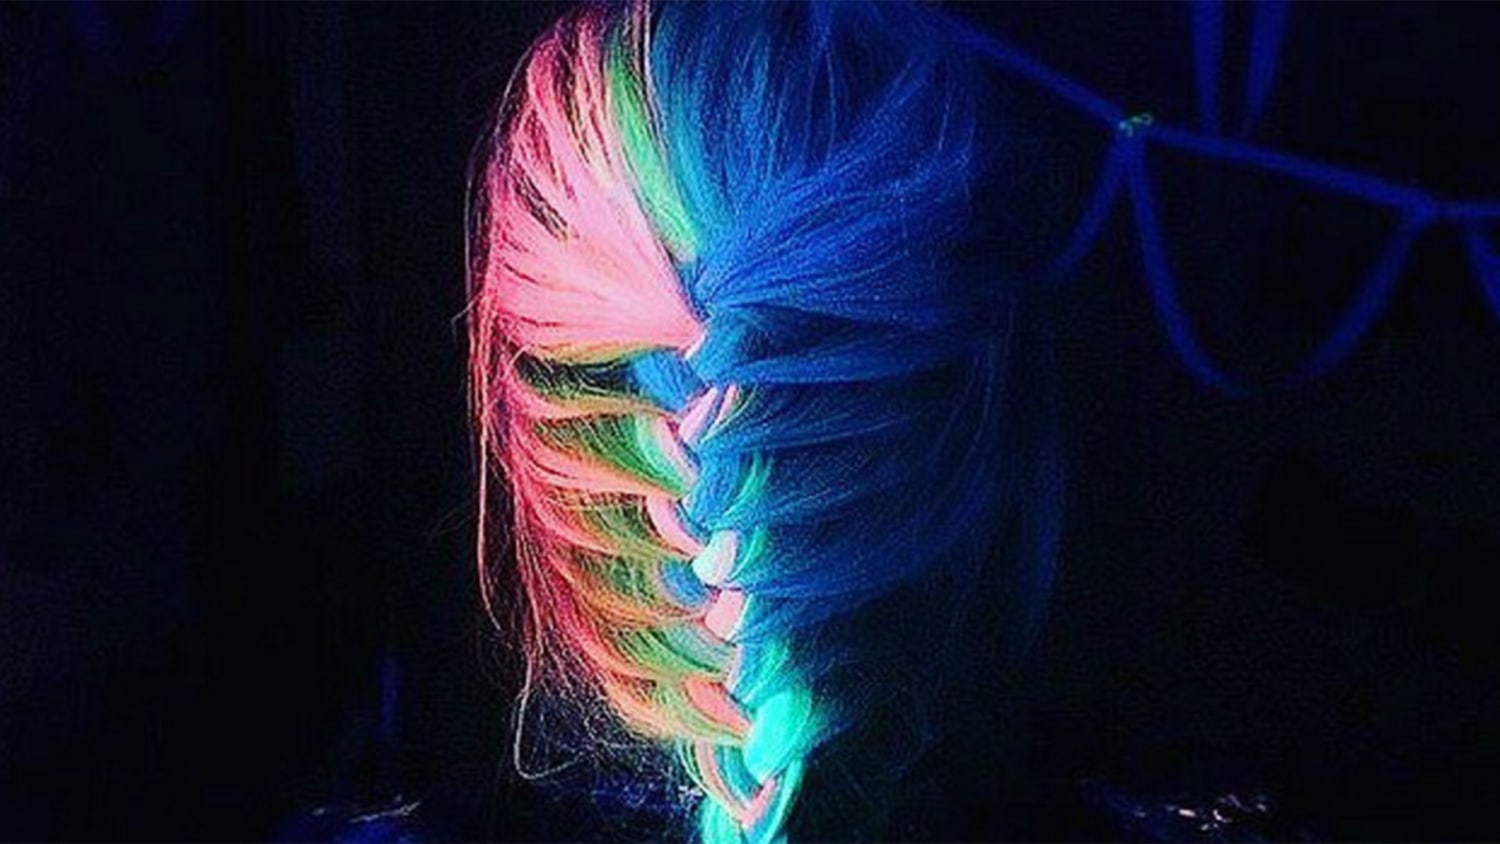 How to Do the Glow-in-the-Dark Hair Trend